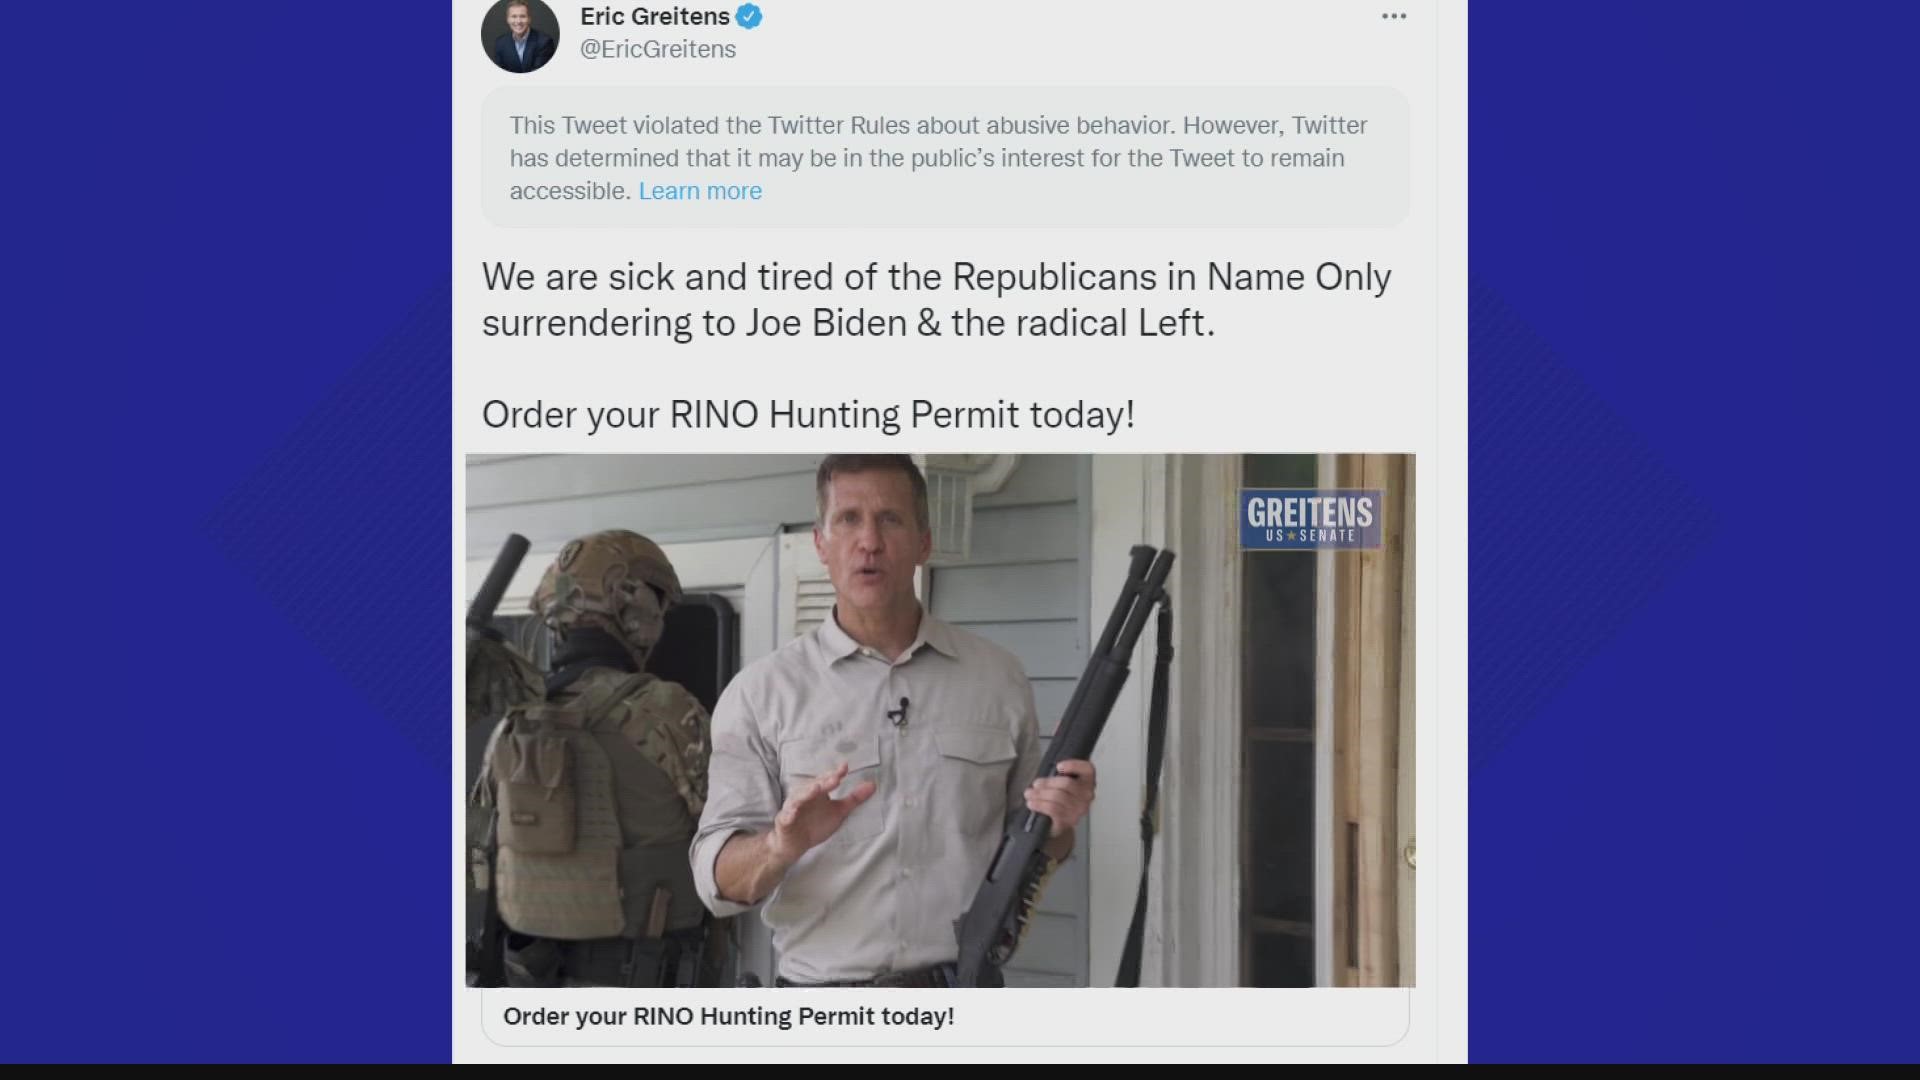 Greitens called the ad, which promoted "hunting" Republicans in name only, a joke. Others disagreed.